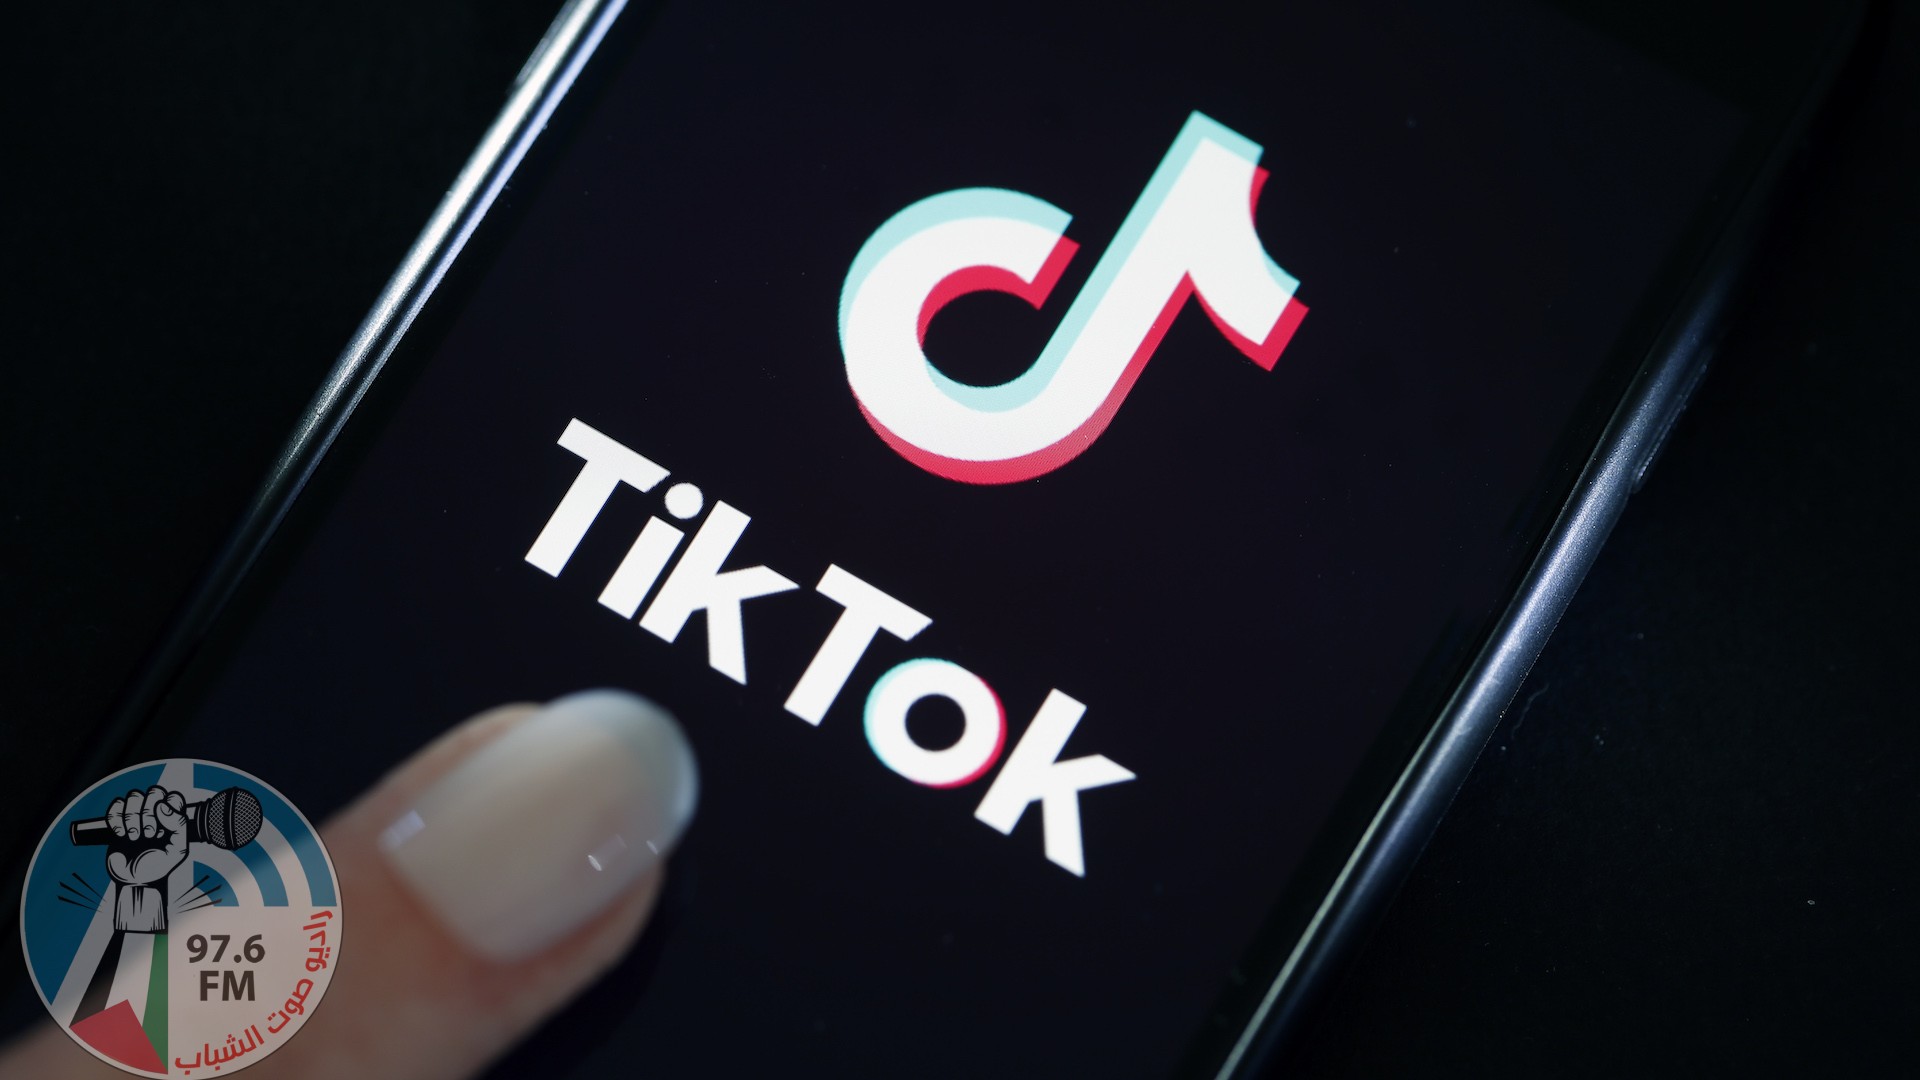 PARIS, FRANCE - MARCH 05: In this photo illustration, the social media application logo, Tik Tok is displayed on the screen of an iPhone on March 05, 2019 in Paris, France. The social network broke the rules for the protection of children's online privacy (COPPA) and was fined $ 5.7 million. The fact TikTok criticized is quite serious in the United States, the platform, which currently has more than 500 million users worldwide, collected data that should not have asked minors. TikTok, also known as Douyin in China, is a media app for creating and sharing short videos. Owned by ByteDance, Tik Tok is a leading video platform in Asia, United States, and other parts of the world. In 2018, the application gained popularity and became the most downloaded app in the U.S. in October 2018. (Photo by Chesnot/Getty Images)